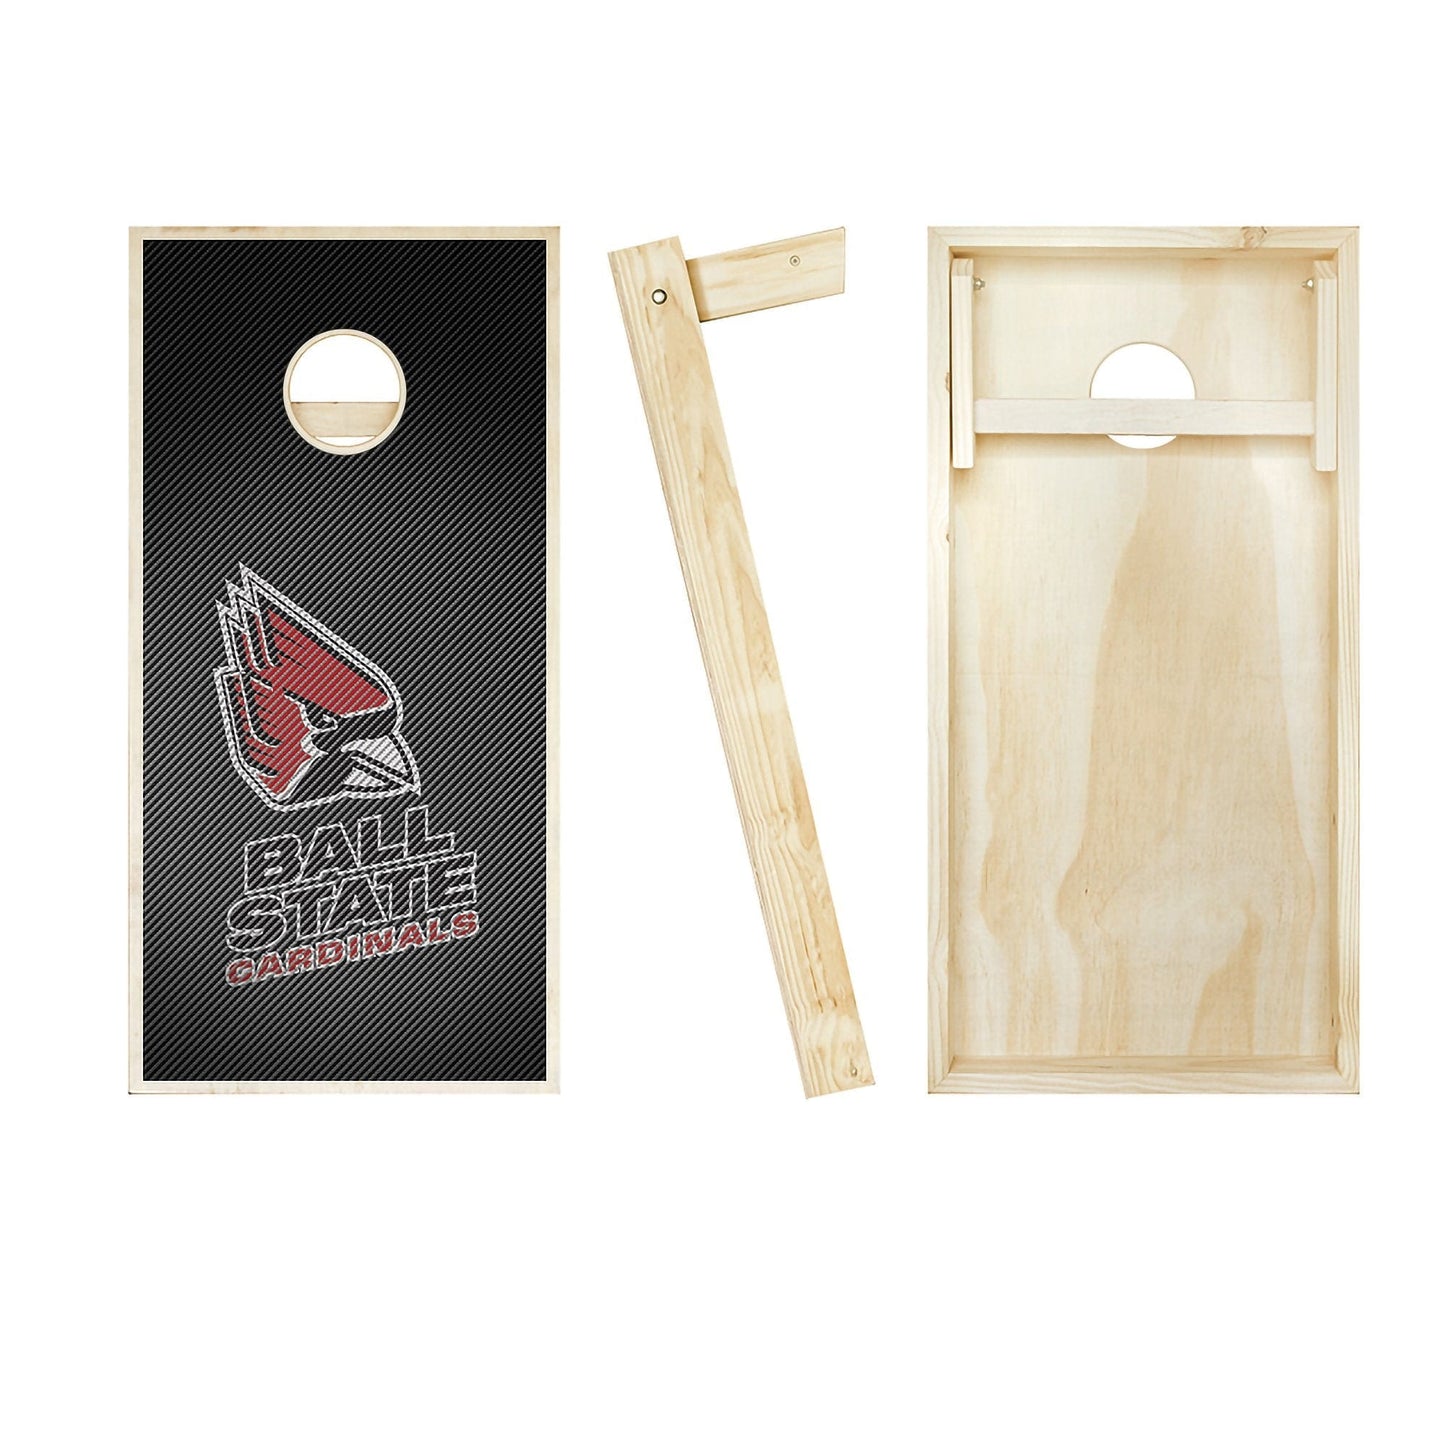 Ball State Cardinals Slanted board entire set